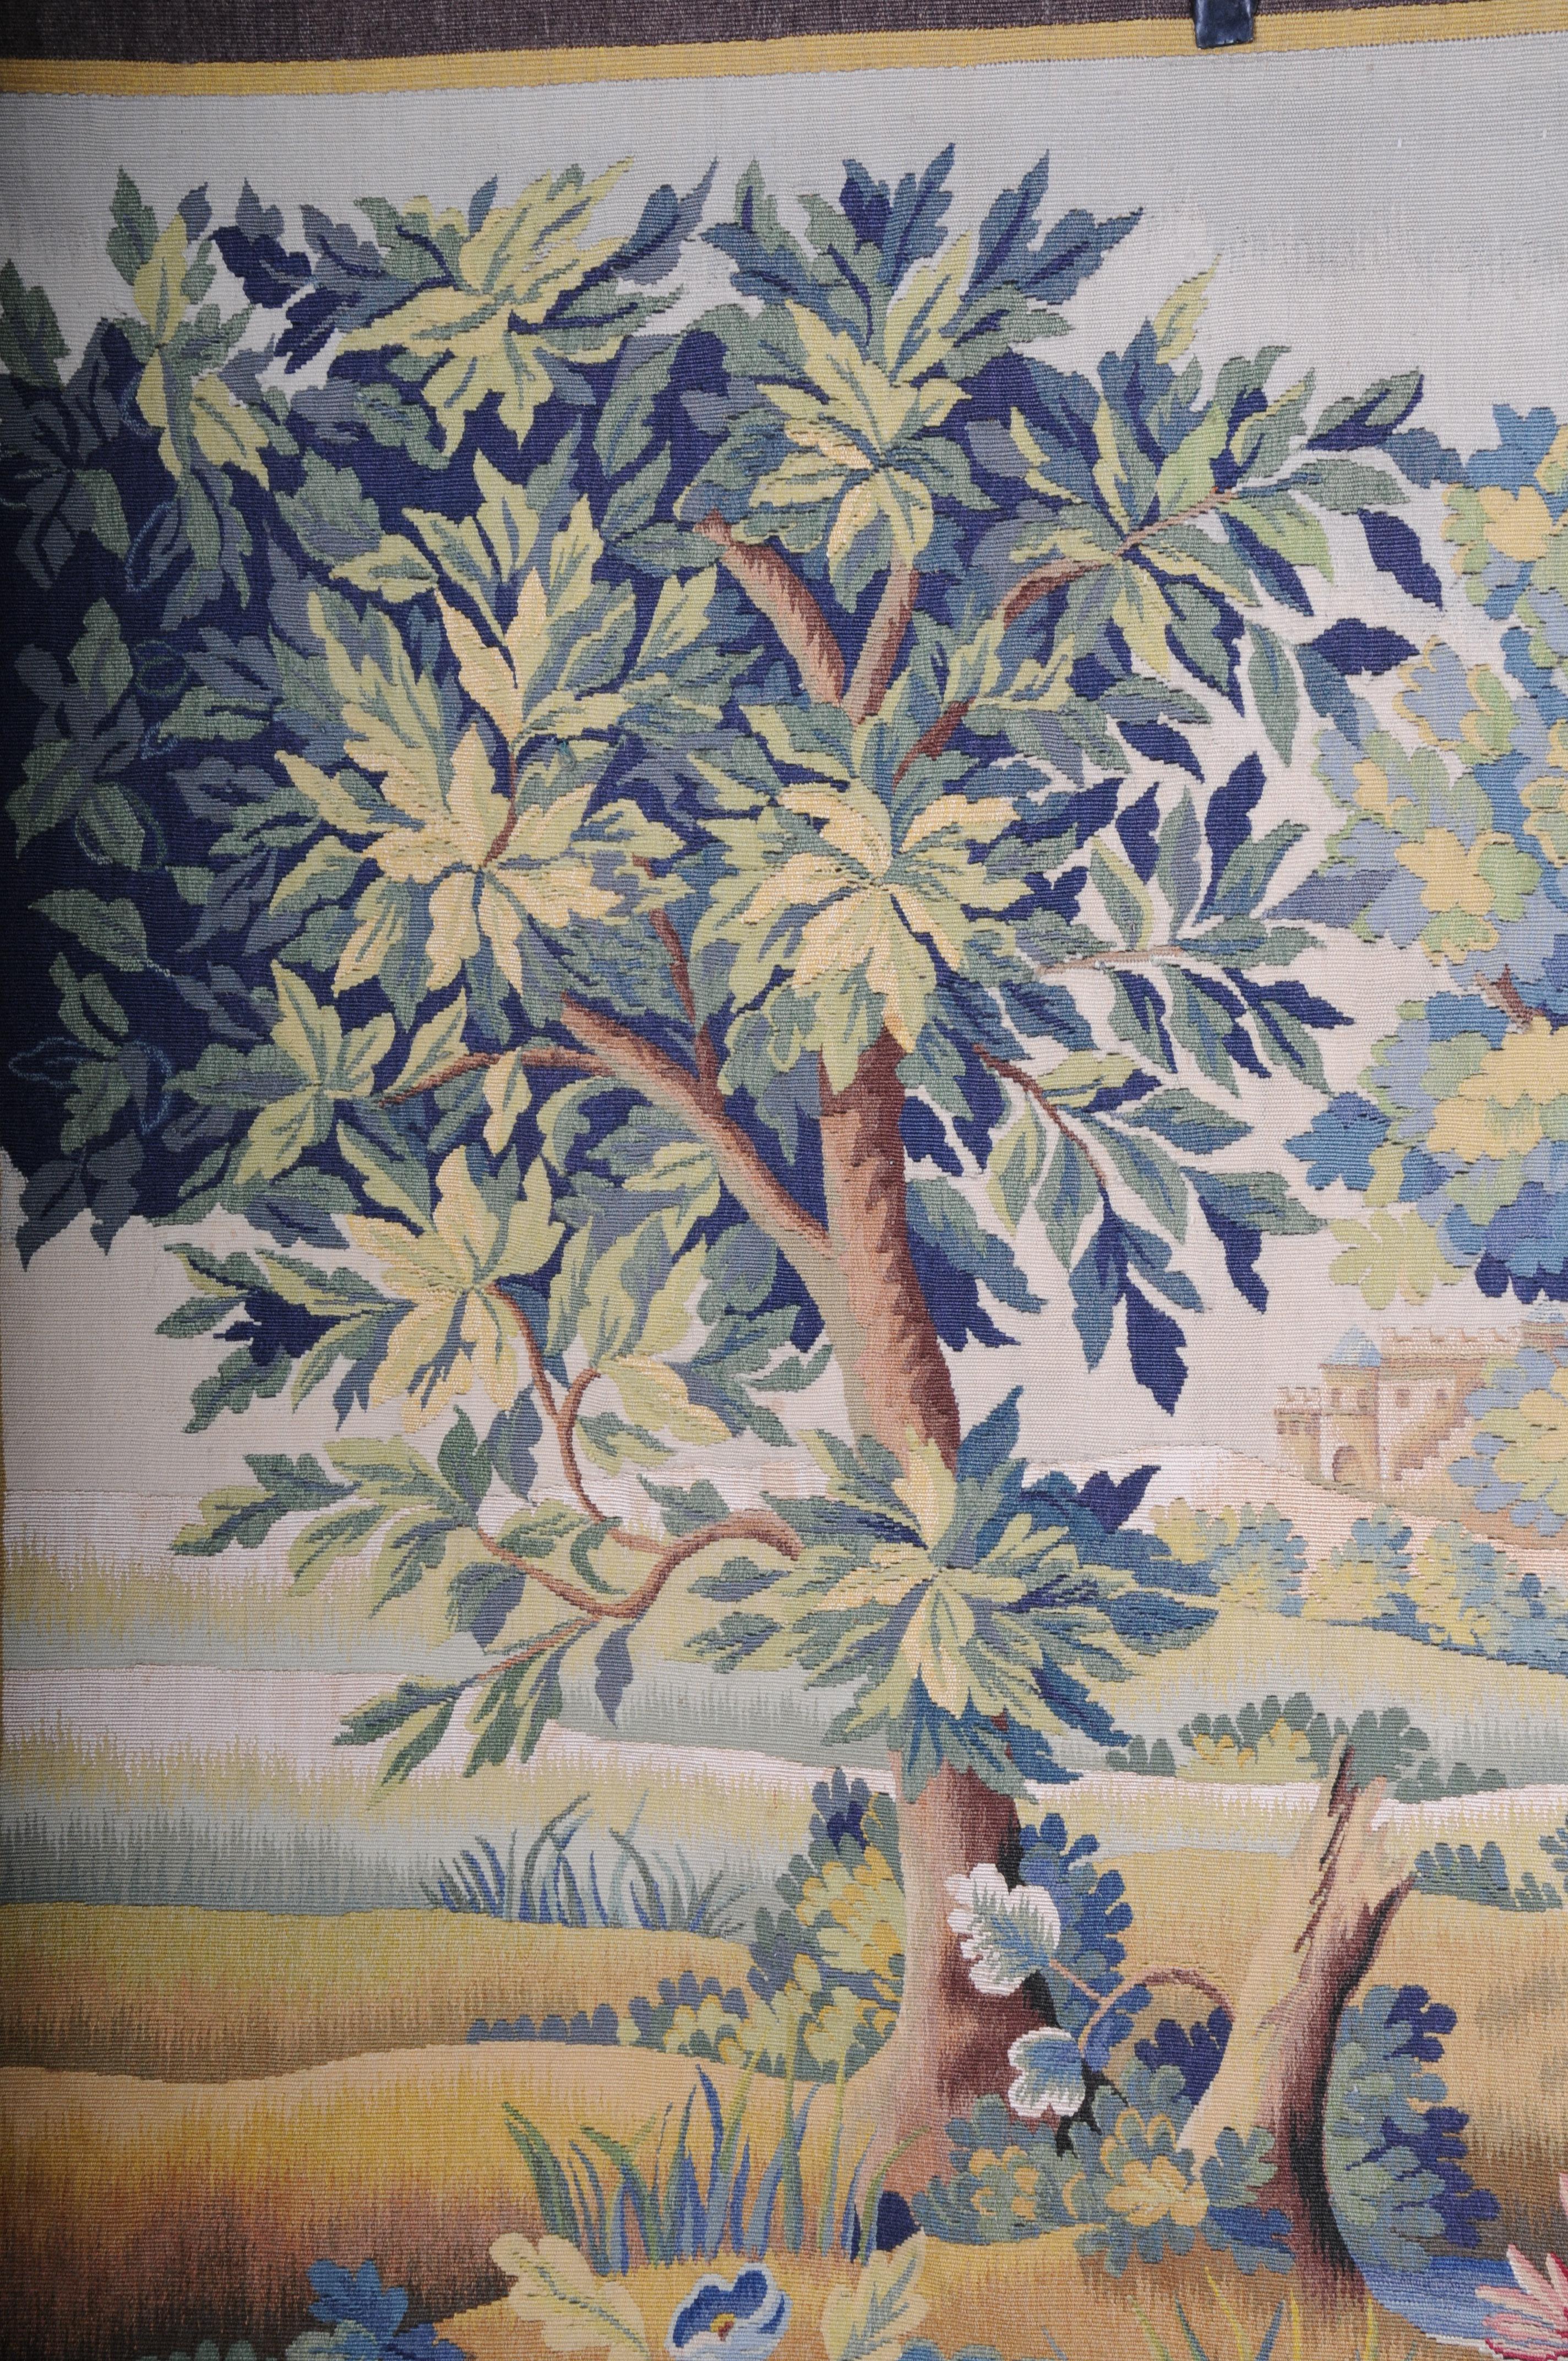 Antique Silk Aubosson wall carpet, France late 19 century. Verdure motif, signed


Antique Musael Aubosson tapestry made of silk and partly wool. Very fine and antique design. Depicting: Verdure - tapestry depicting plants in green colors. A very